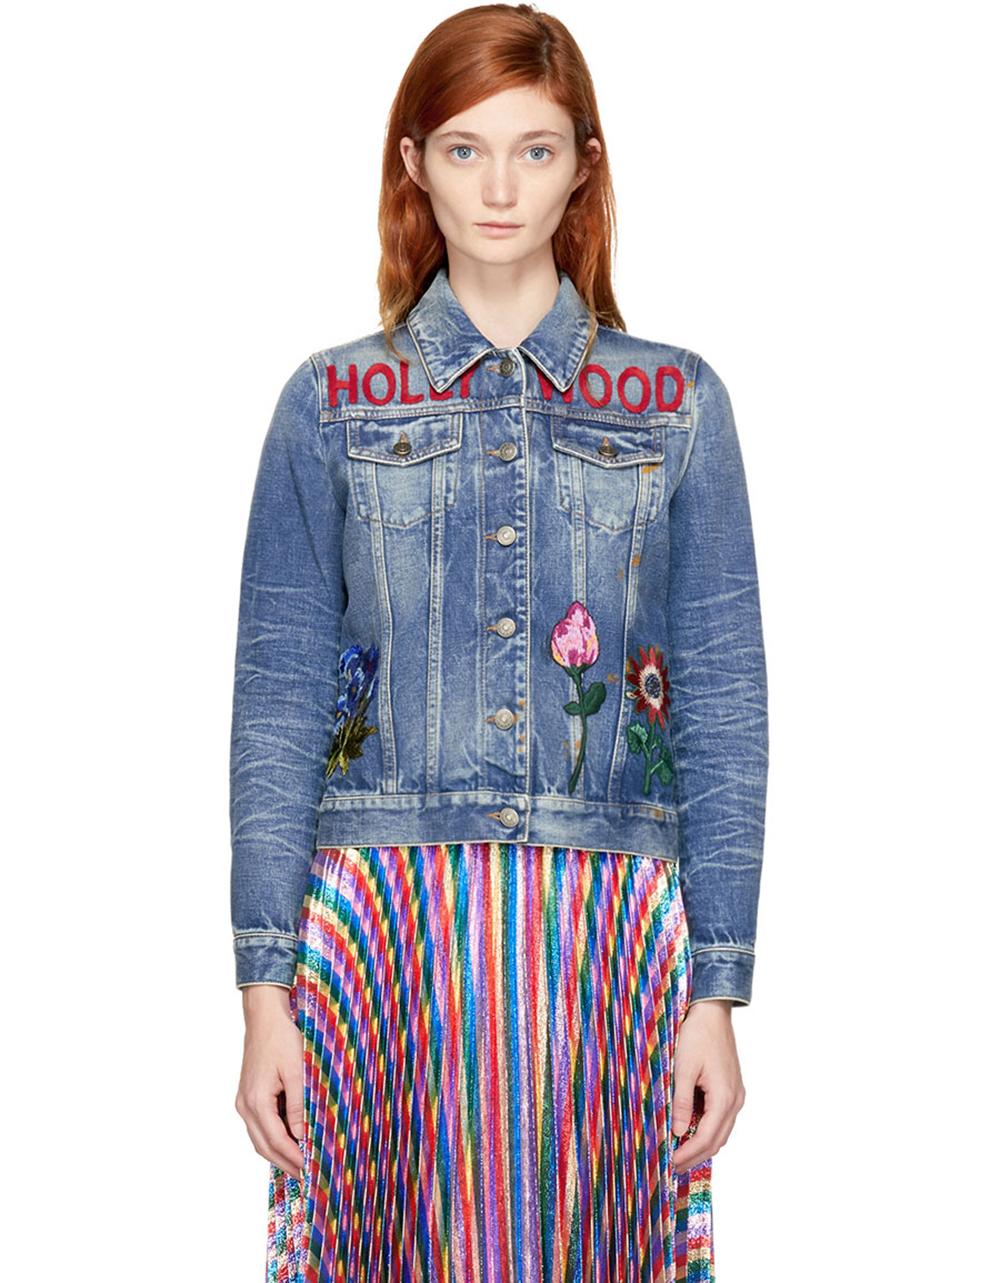 Collectors Gucci denim jacket with HOLLYWOOD Slogan and Rabbit & Flora embroidery throughout.
- Boutique price 3,200$
Size mark 42 FR. Condition is pristine. 